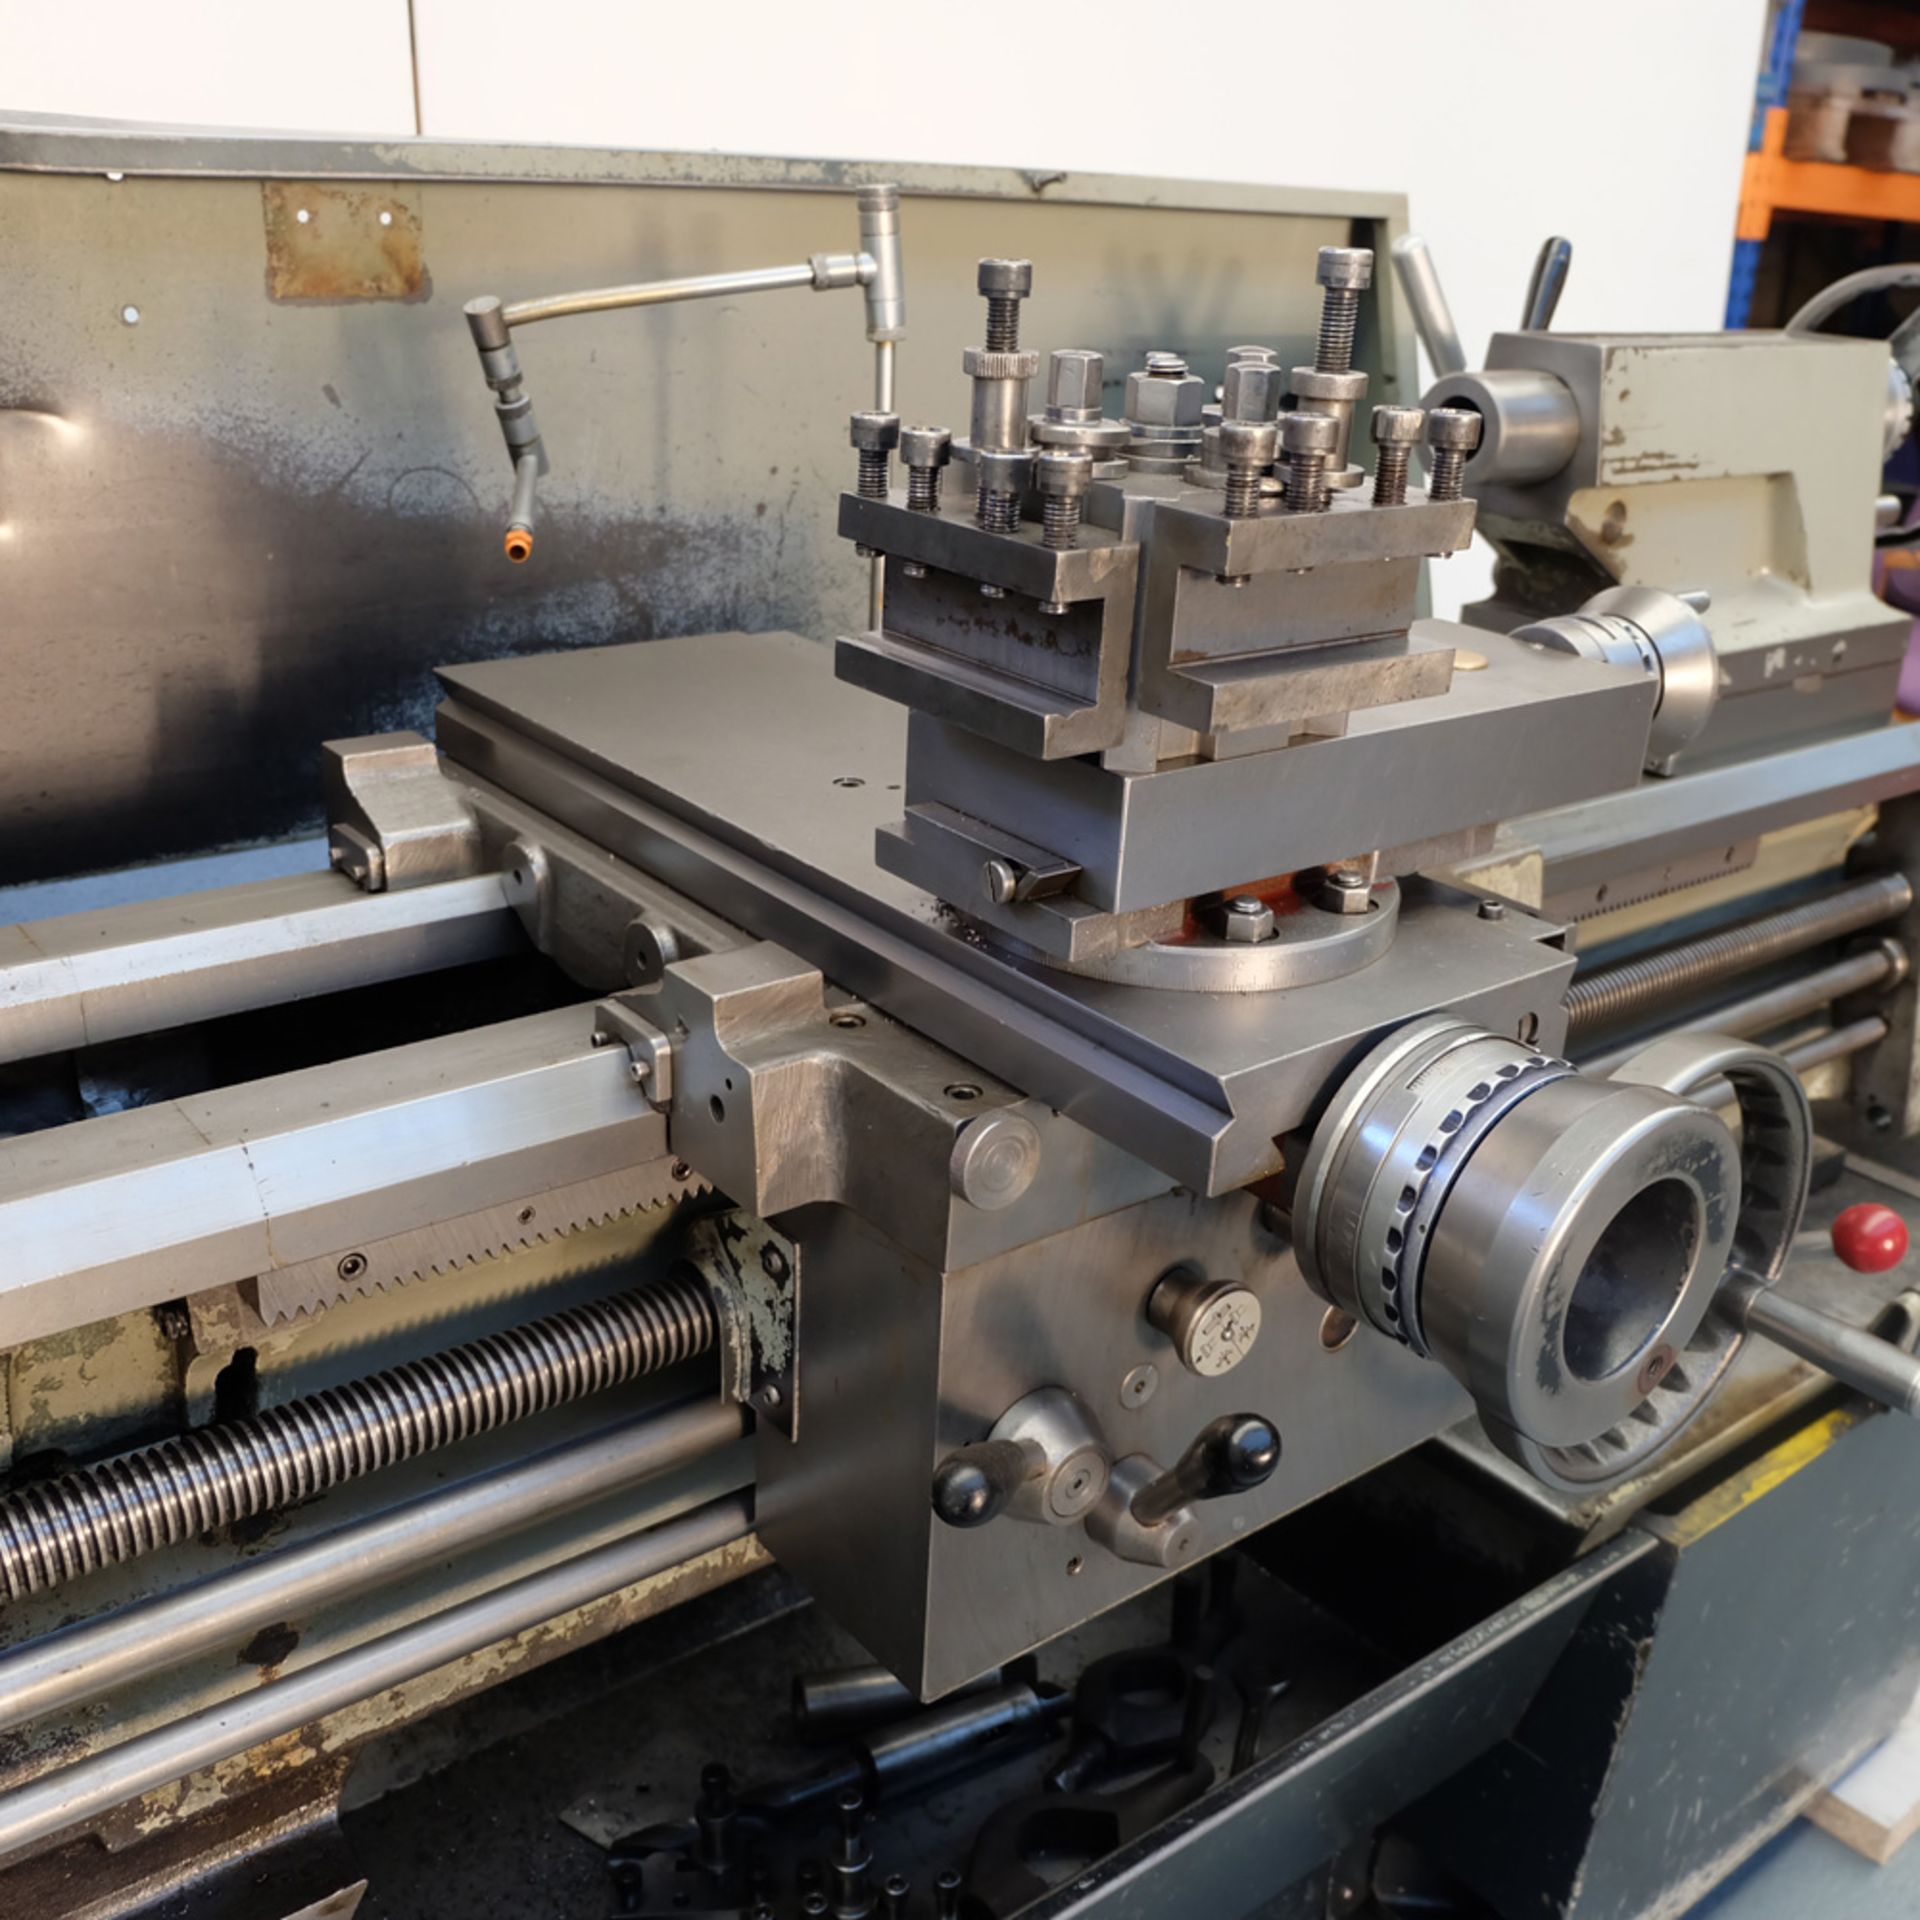 Colchester Mascot 1600 Gap Bed Centre Lathe. Swing Over Bed 17". Swing Over Cross Slide 10 1/2". - Image 6 of 13